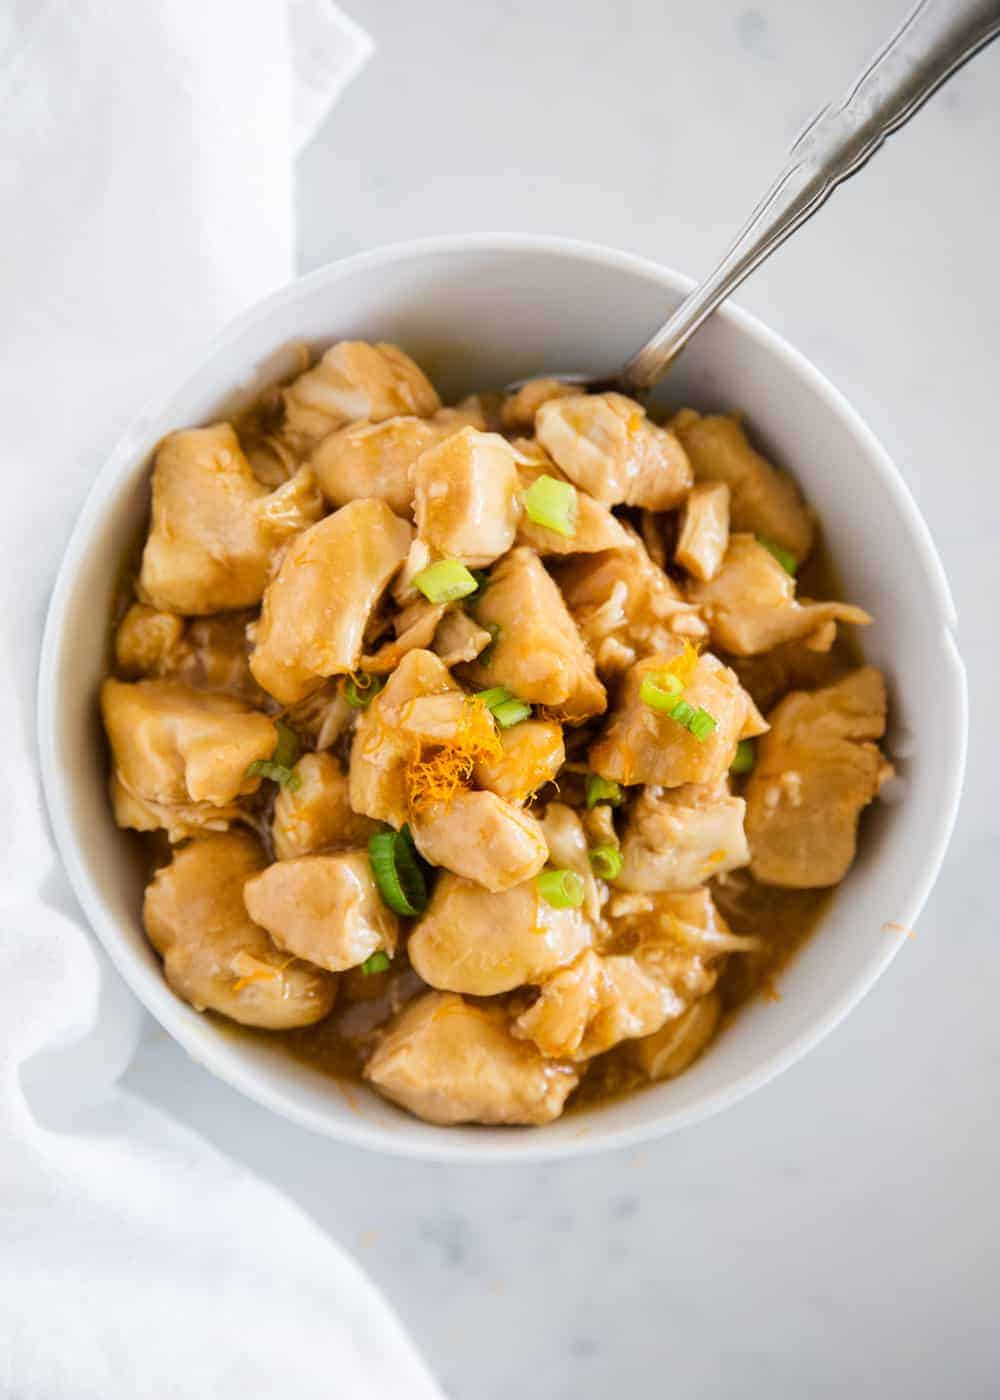 Orange chicken with green onions in white bowl.